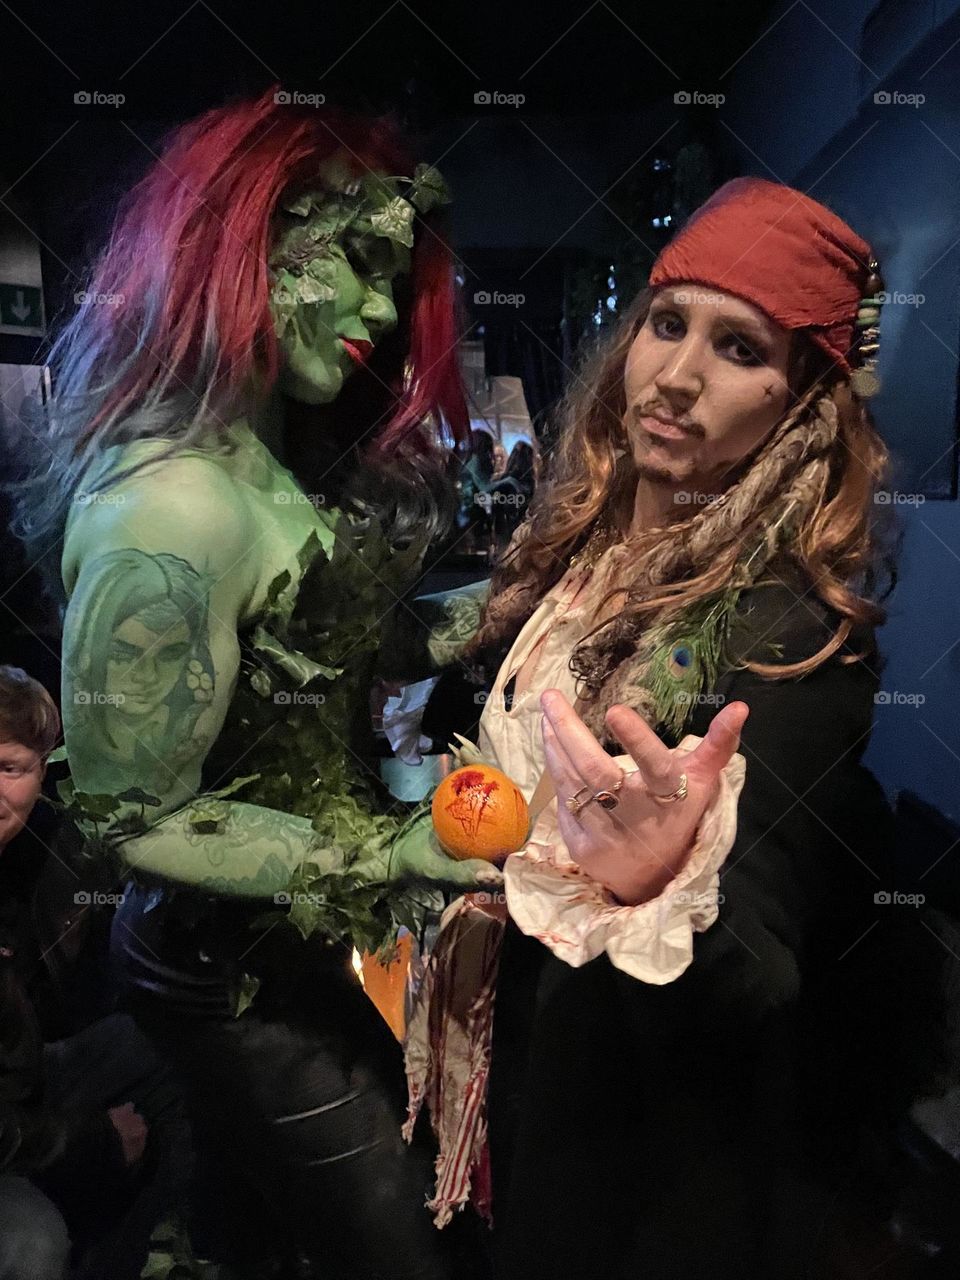 Poison Ivy and Jack Sparrow on halloween.